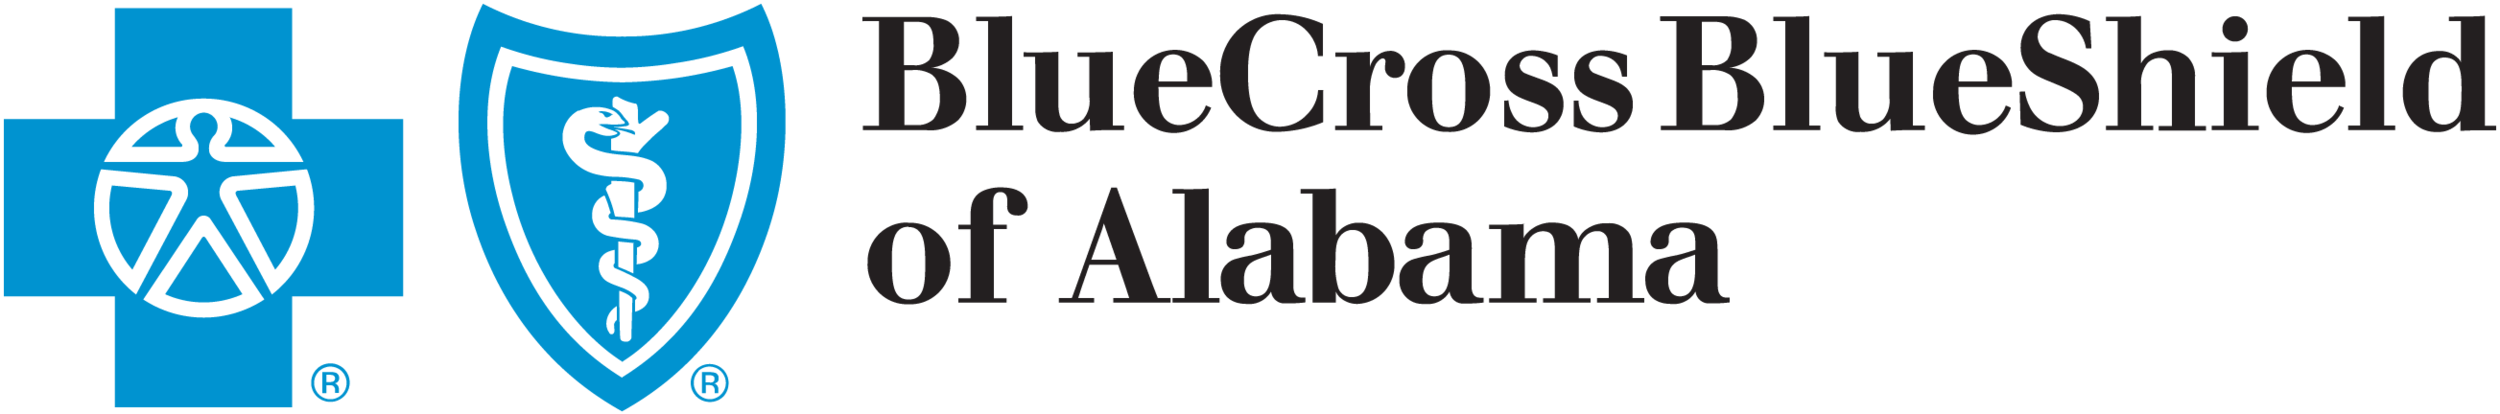 Blue Cross and Blue Shield of Alabama.png